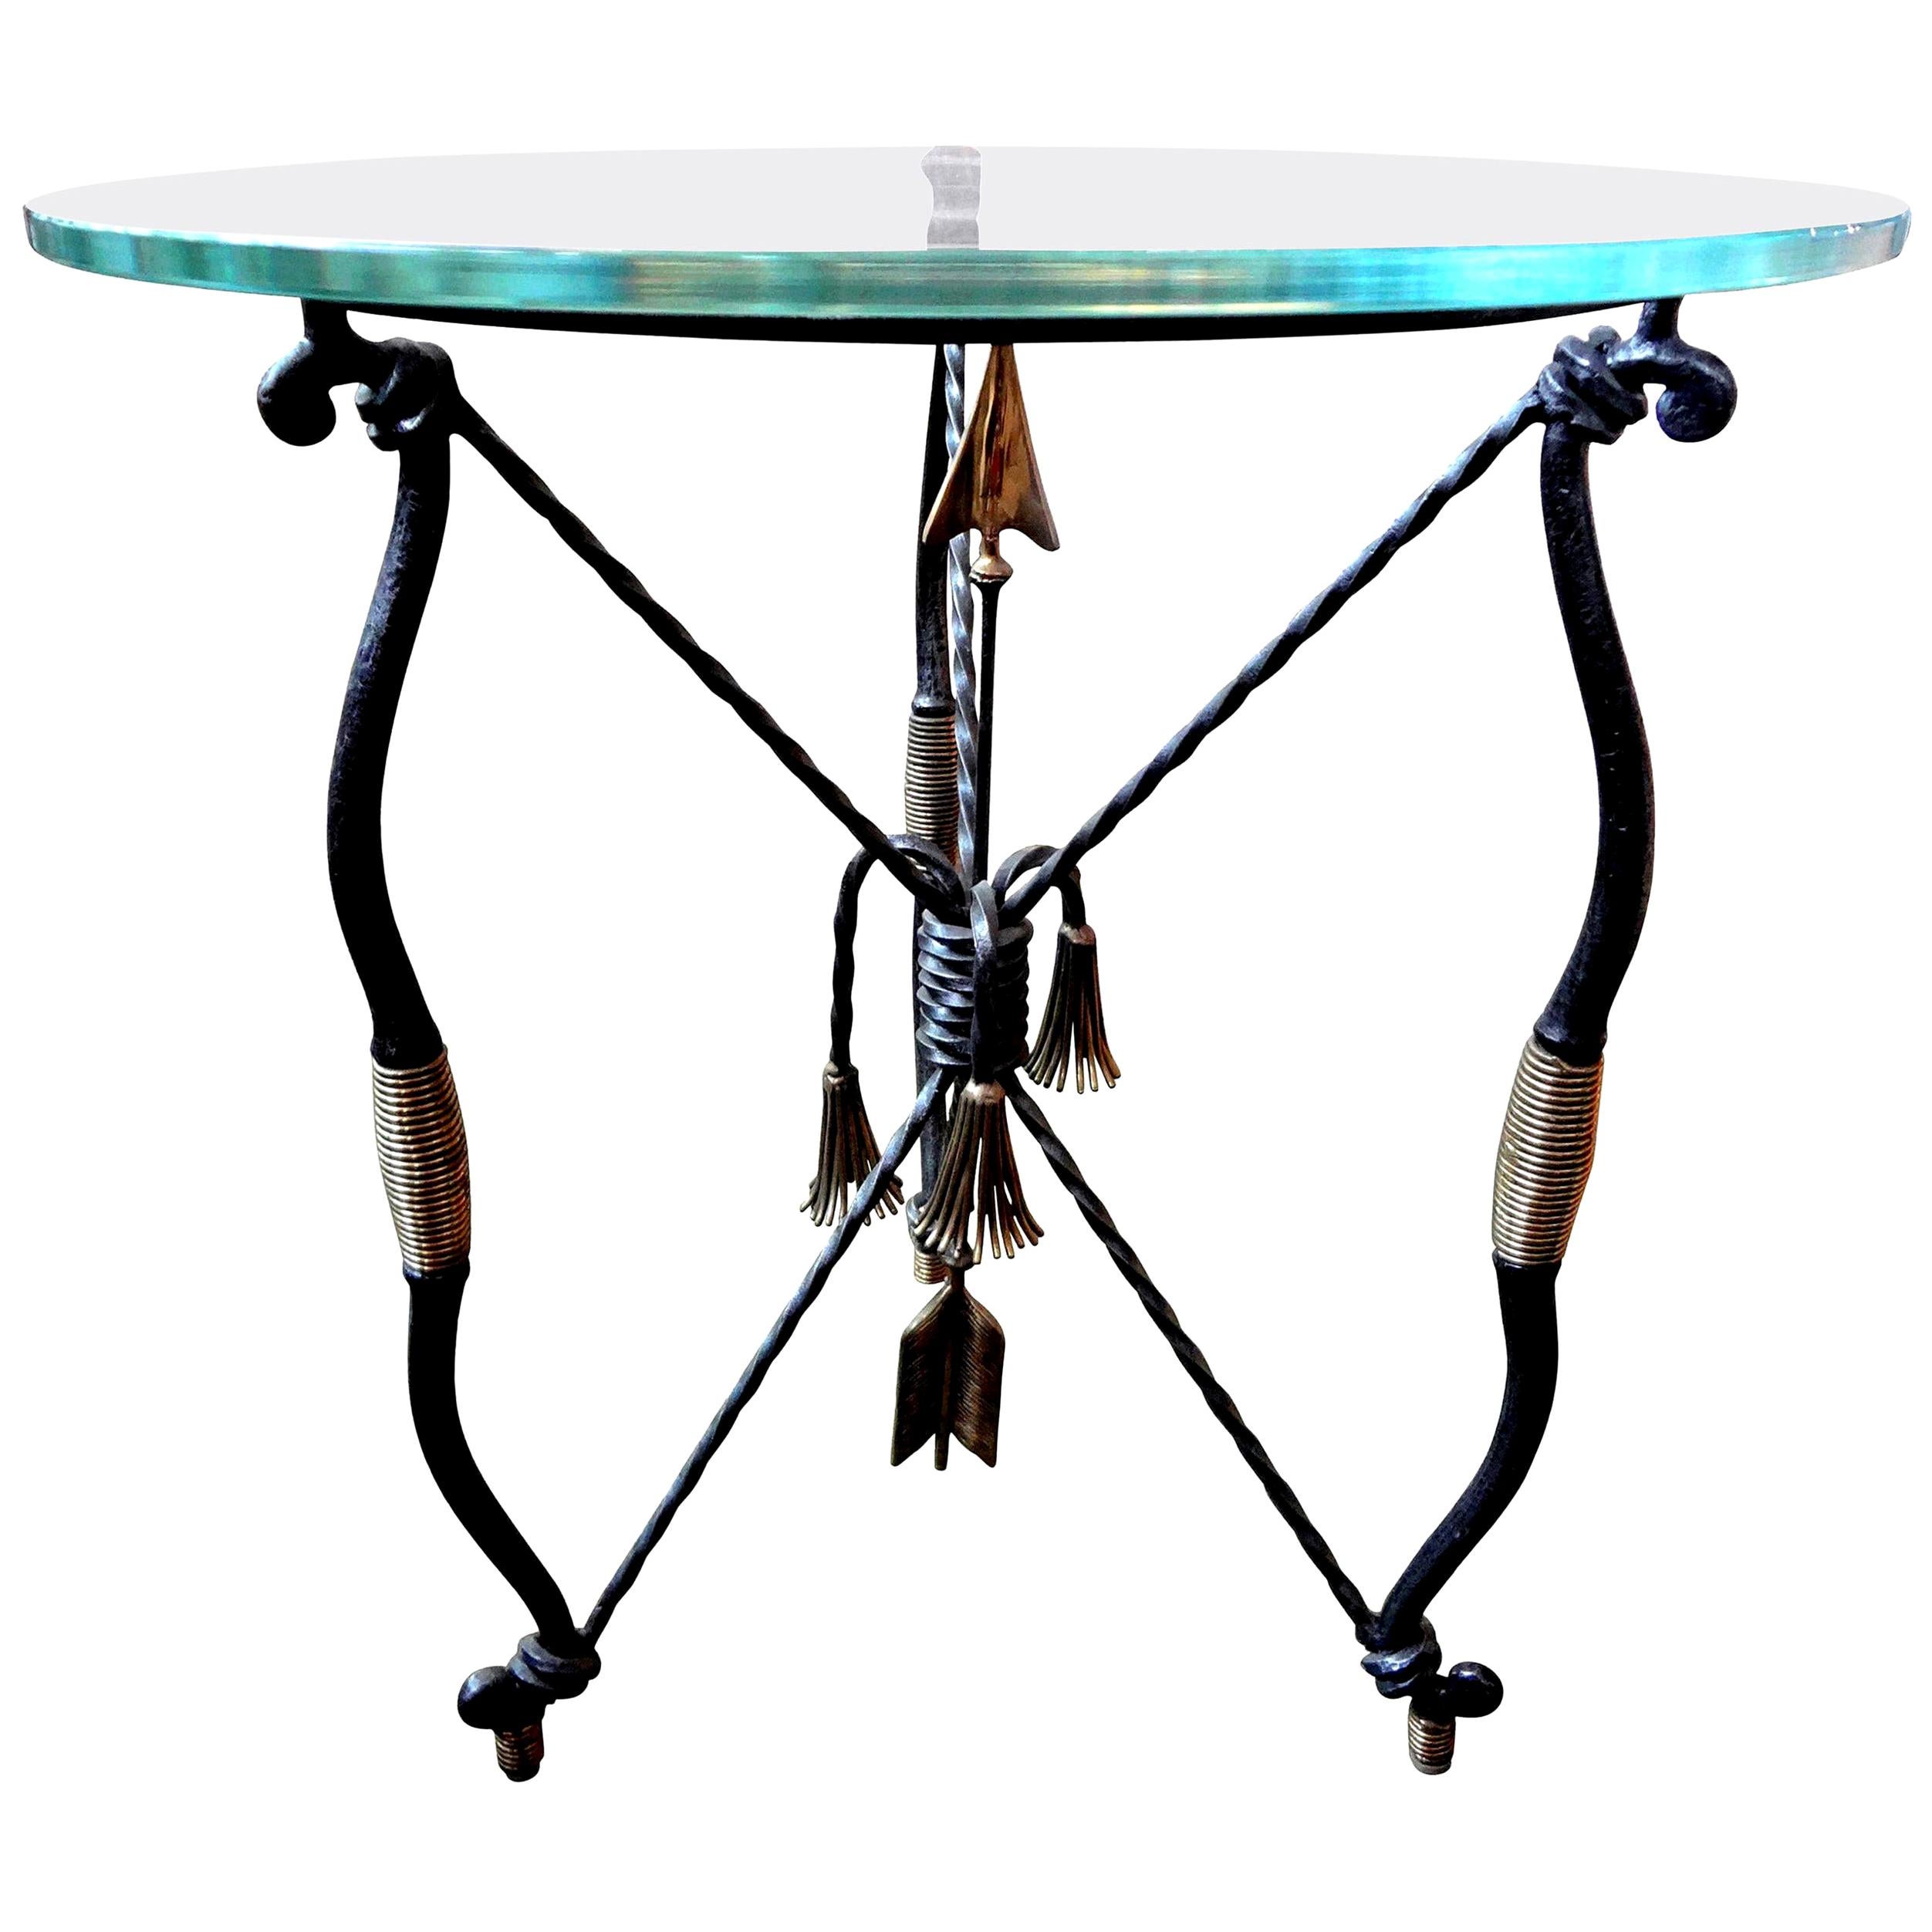 Italian Giacometti Inspired Iron and Brass Table with Glass Top